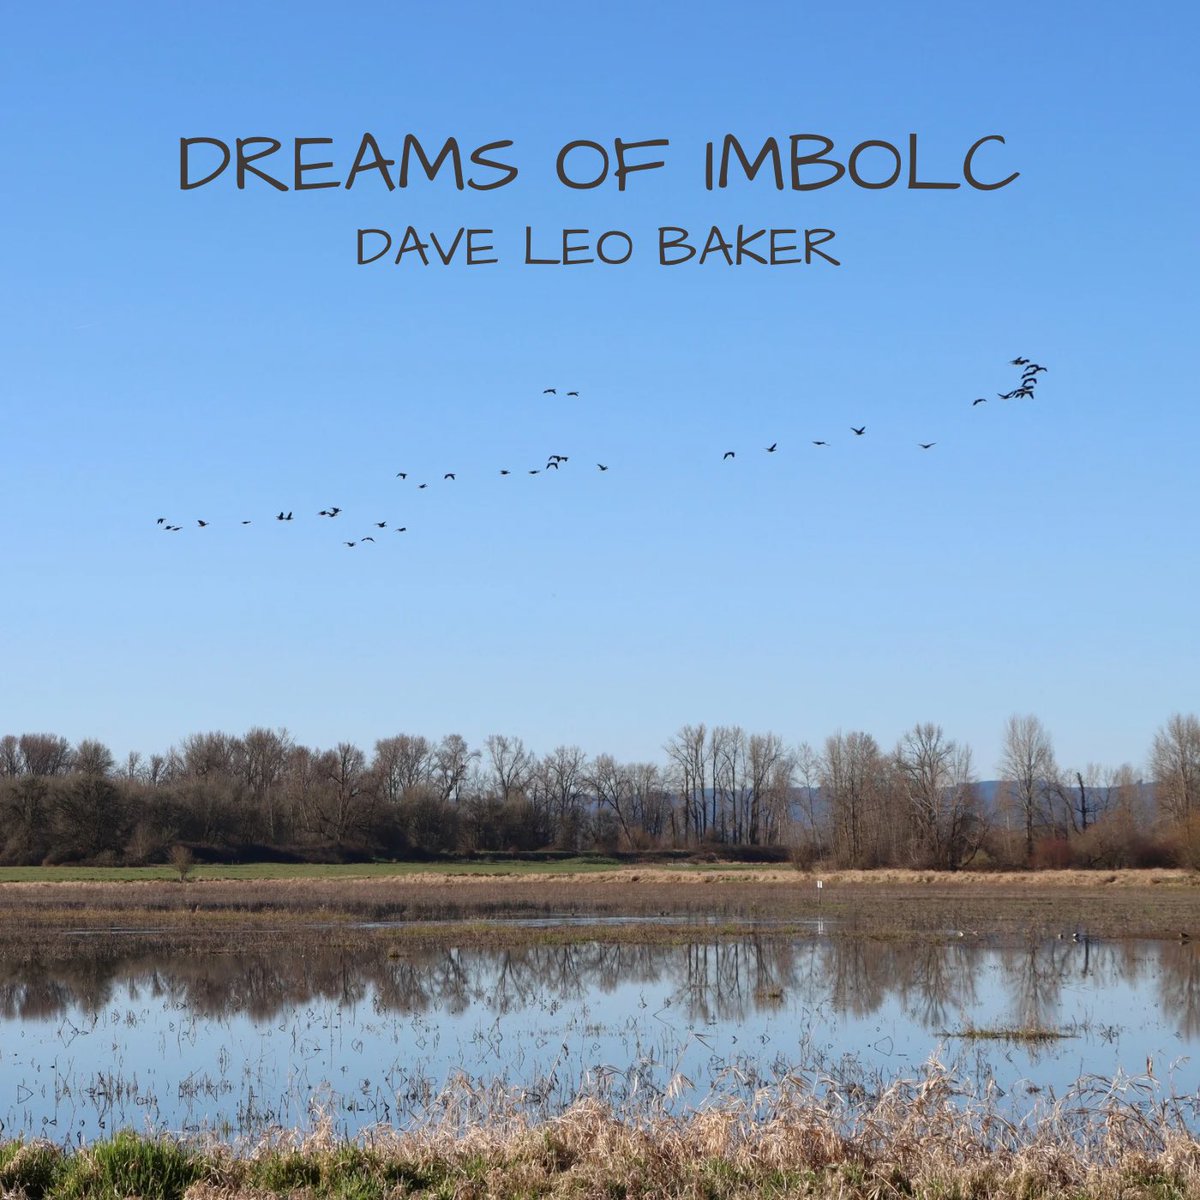 “Dreams Of Imbolc” coming soon to all streaming platforms! Celtic vibes with nightingale and dove songs! Watch for it wherever you get your music!